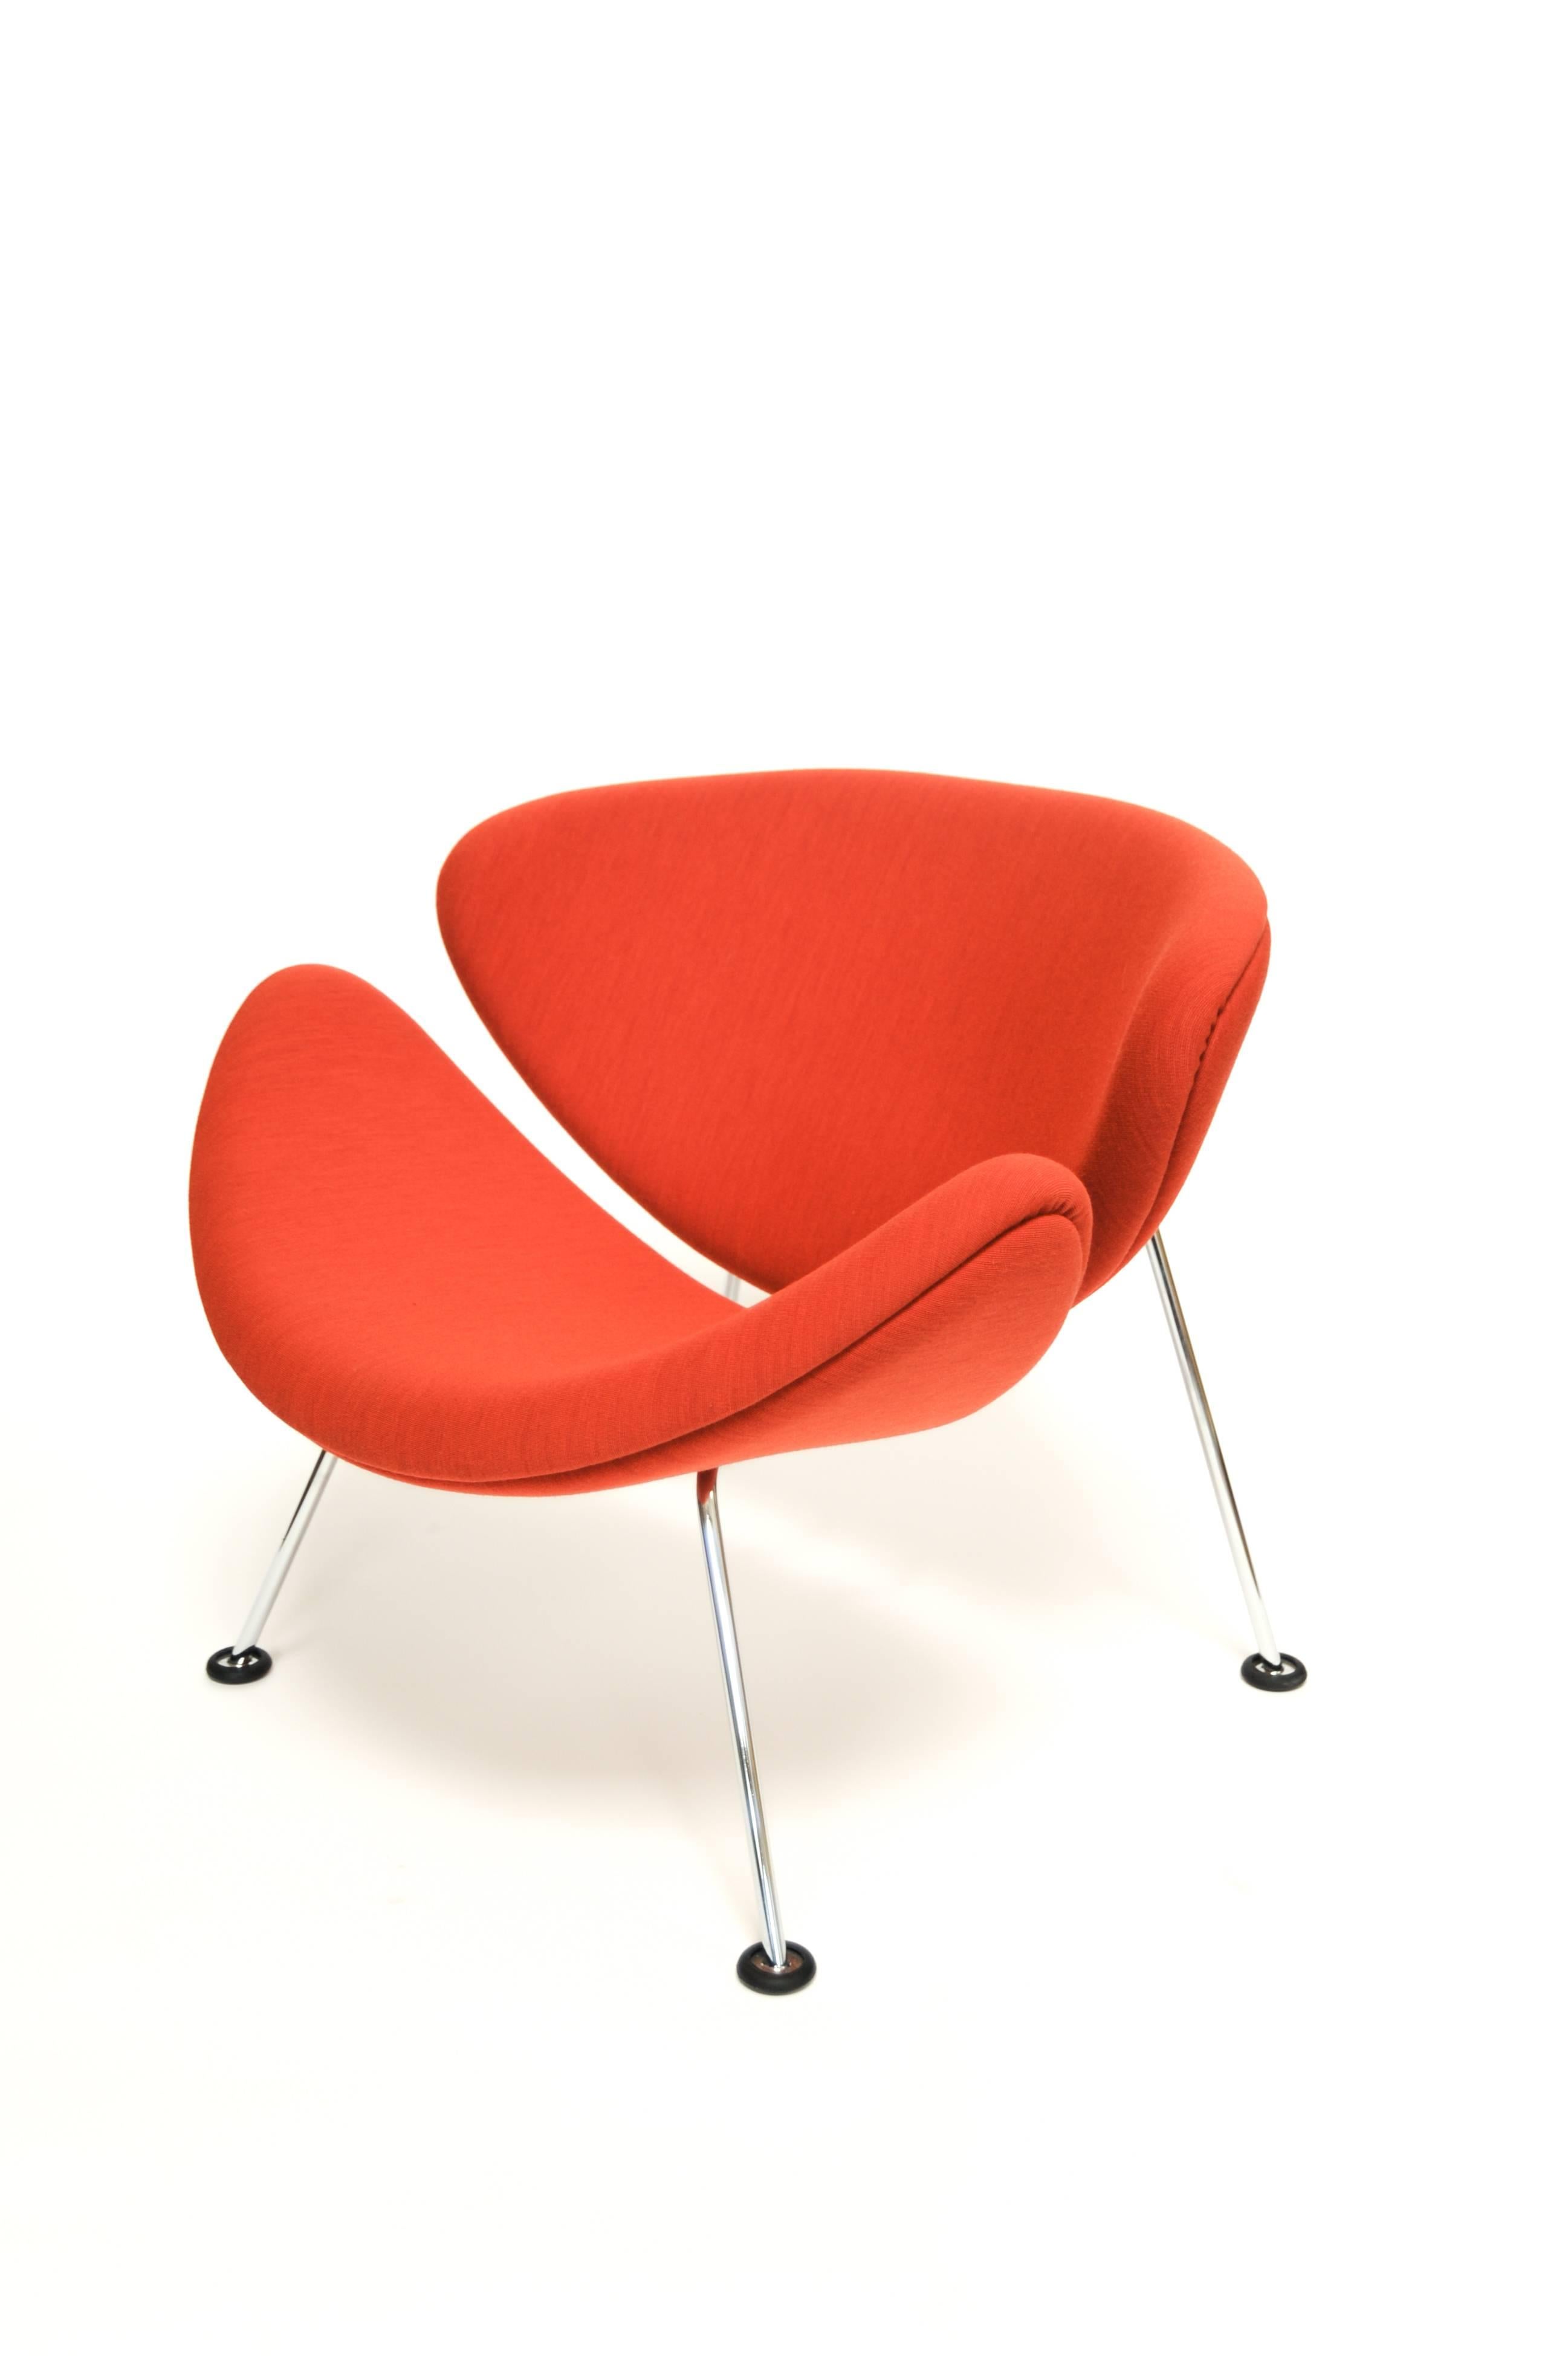 Orange slice Jr chair by Pierre Paulin in Bute 'Tiree', Netherlands.

Produced by Artifort, Netherlands, 2017
Measures: H 21.25 in, W 24.5 in, D 24.5 in (seat H 12.25 in)
Fabric: Bute 'Tiree'

Chair as shown: Febrik 'Uniform' fabric, orange,